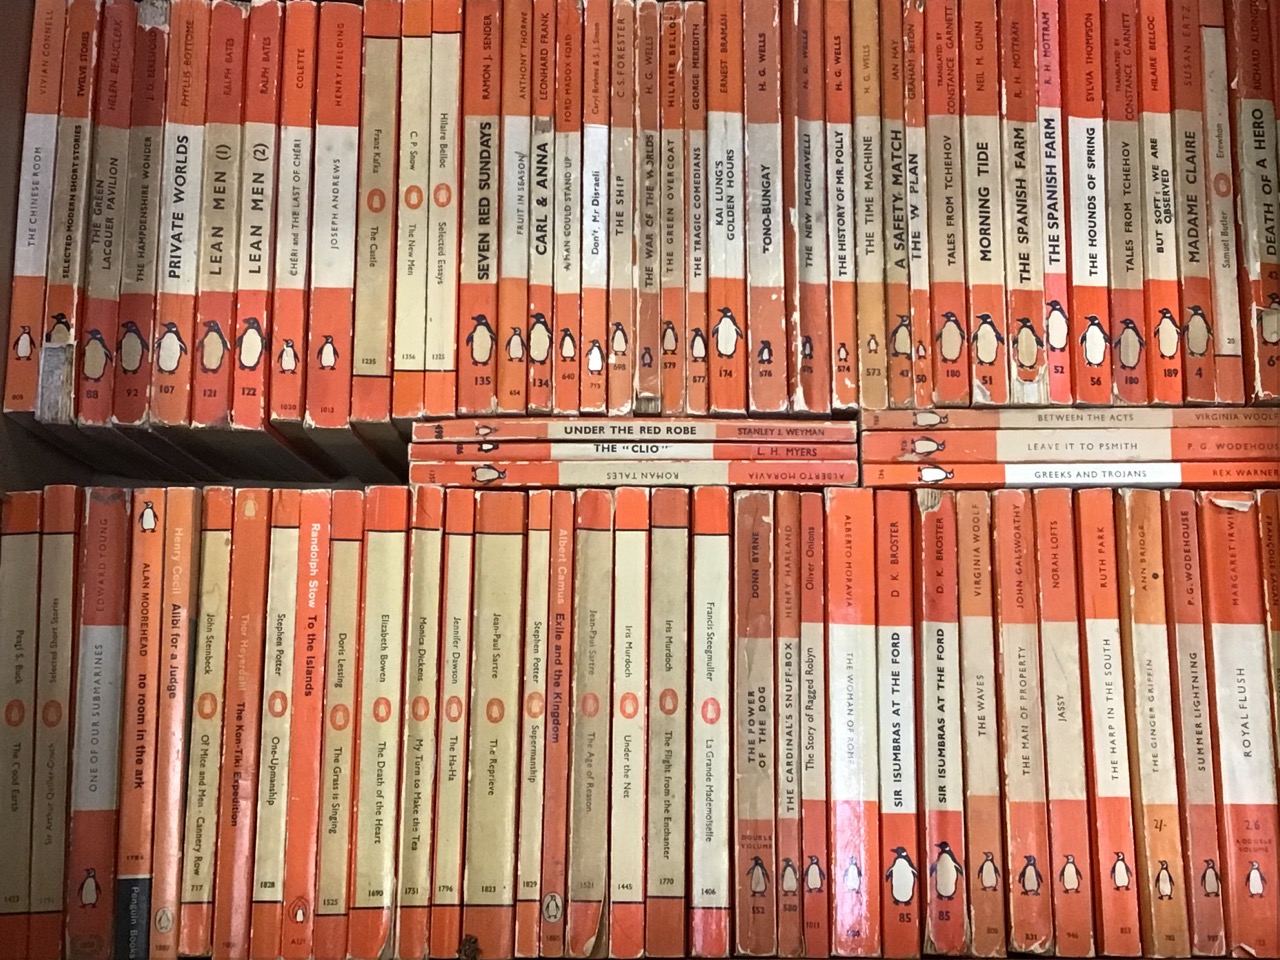 A collection of early Penguin & Pelican paperbacks - novels, histories, mysteries, academic - Image 2 of 3